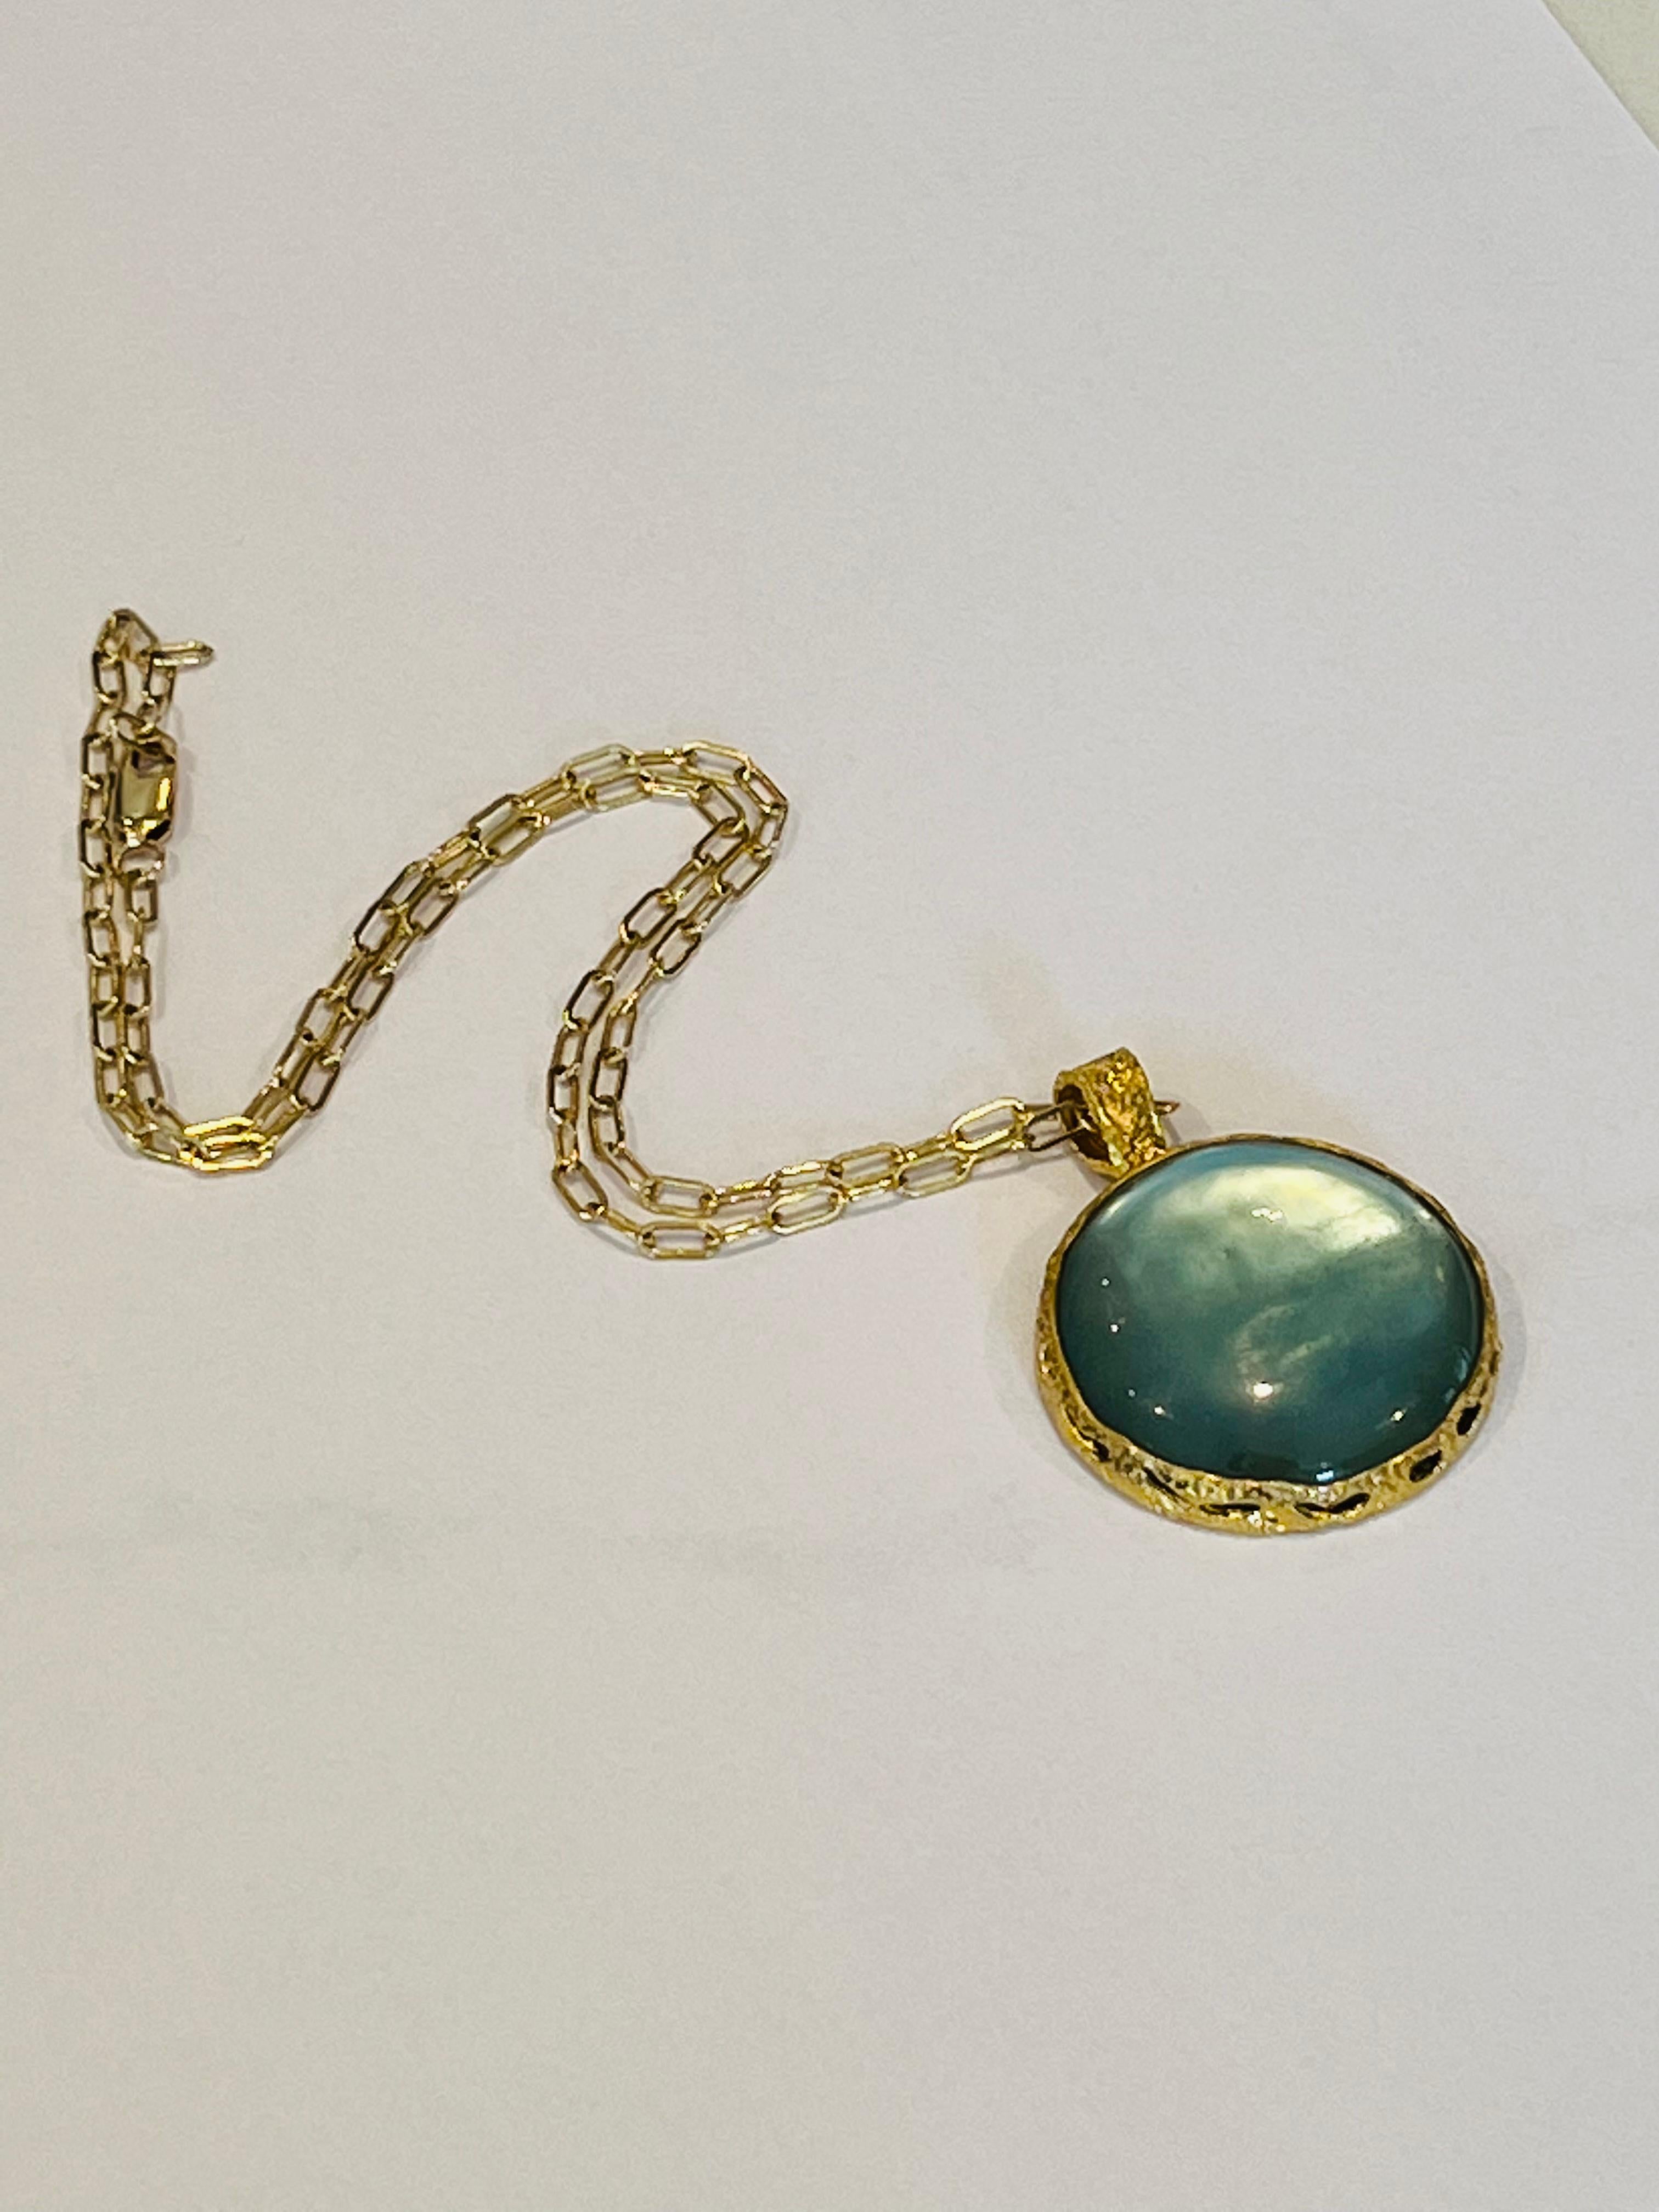 Celeste Reversible Aqua and Mother of Pearl Pendant in 22k Gold, by Tagili 5